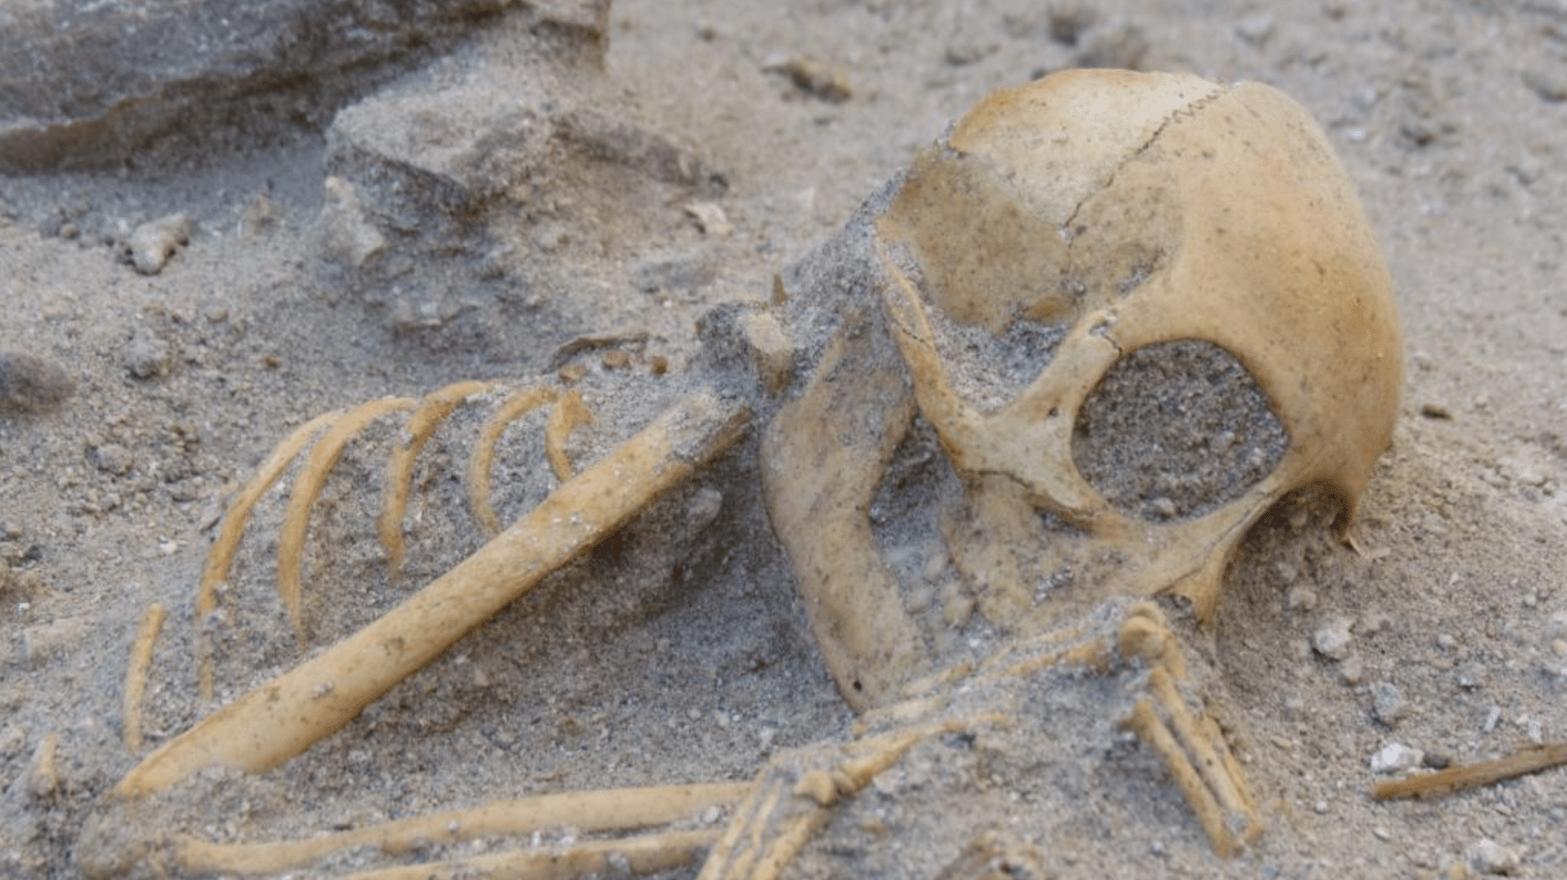 A monkey skeleton found at a pet cemetery in Berenice.  (Image: Marta Osypińska/Institute of Archaeology and Ethnology of the Polish Academy of Sciences)